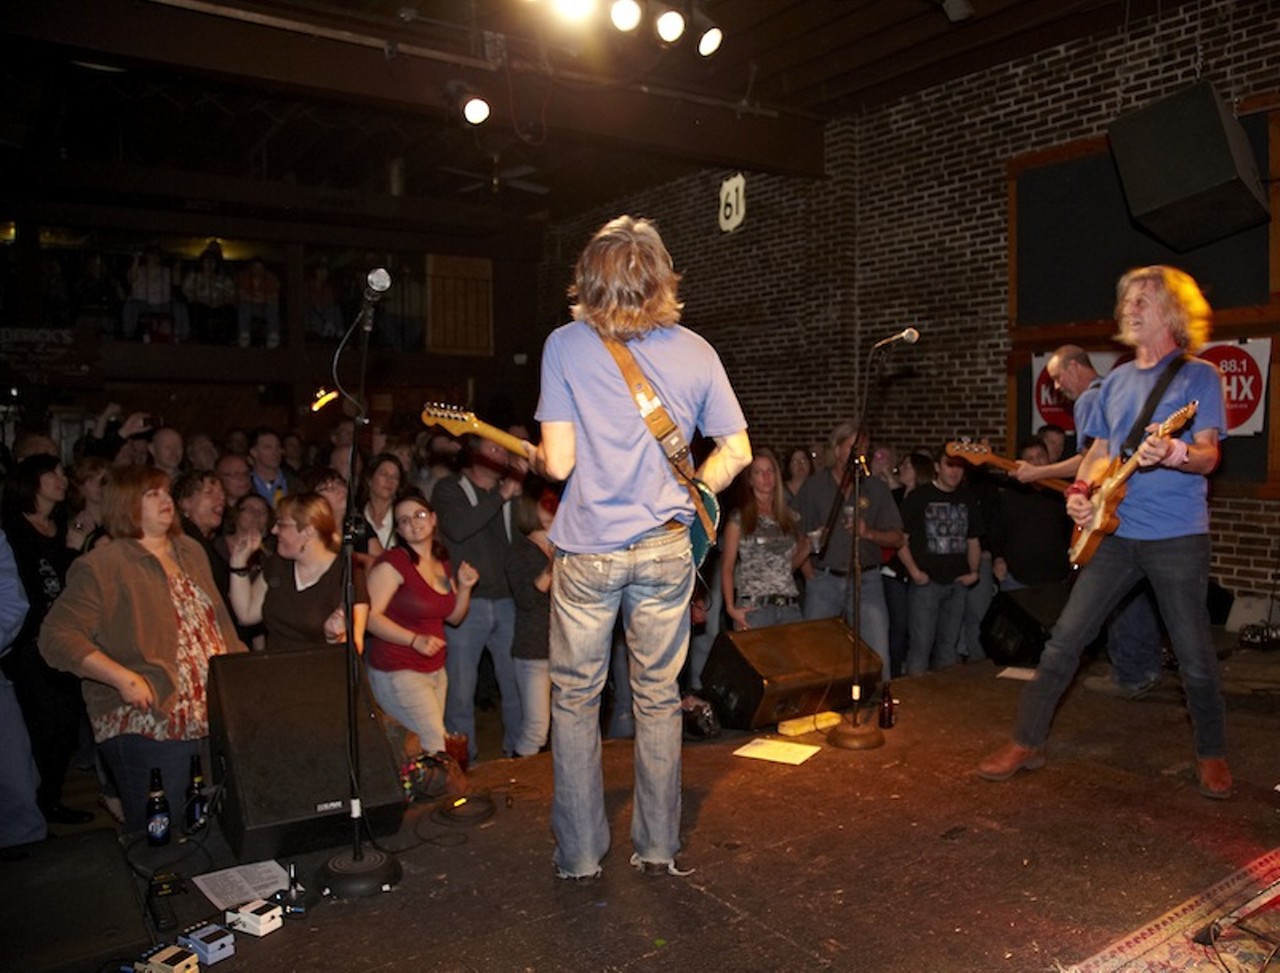 The Rainmakers played their first show in St. Louis in over a decade to a crowded Off Broadway.